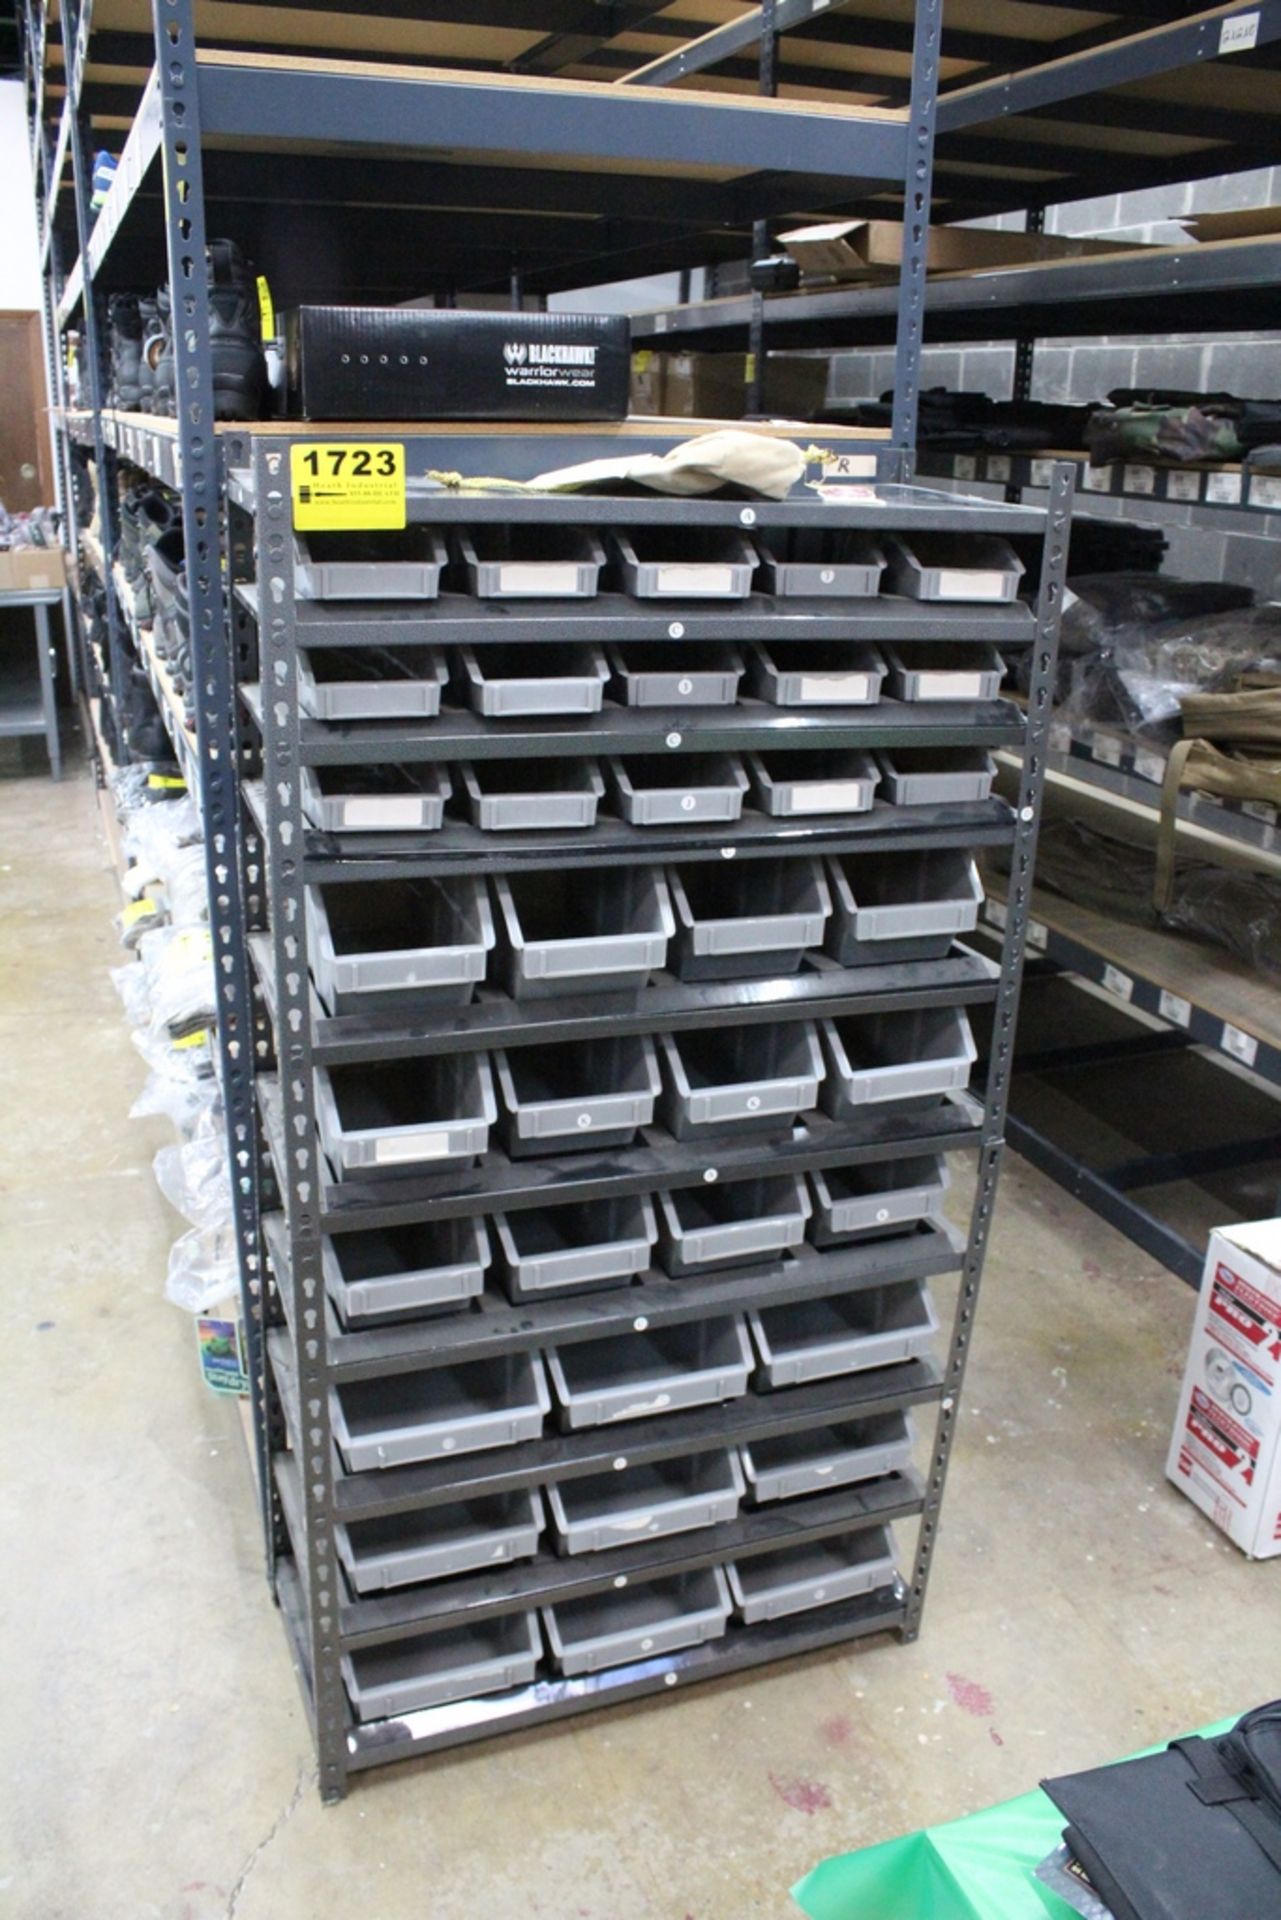 STEEL SHELVING UNIT, 62" X 33" X 16" WITH 36 PARTS TRAYS